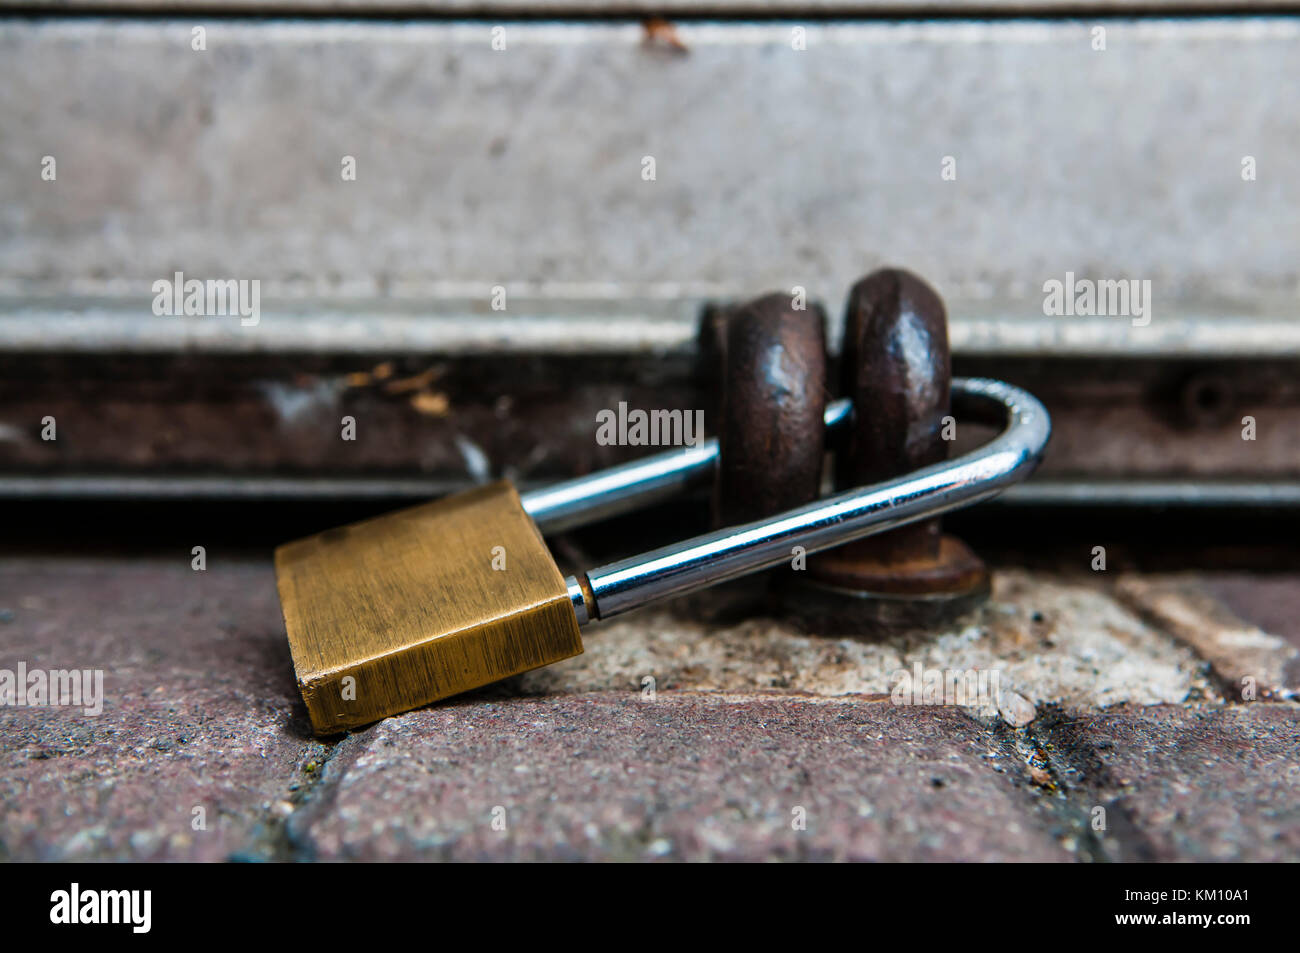 Padlock securing the shutter of a shop. Stock Photo